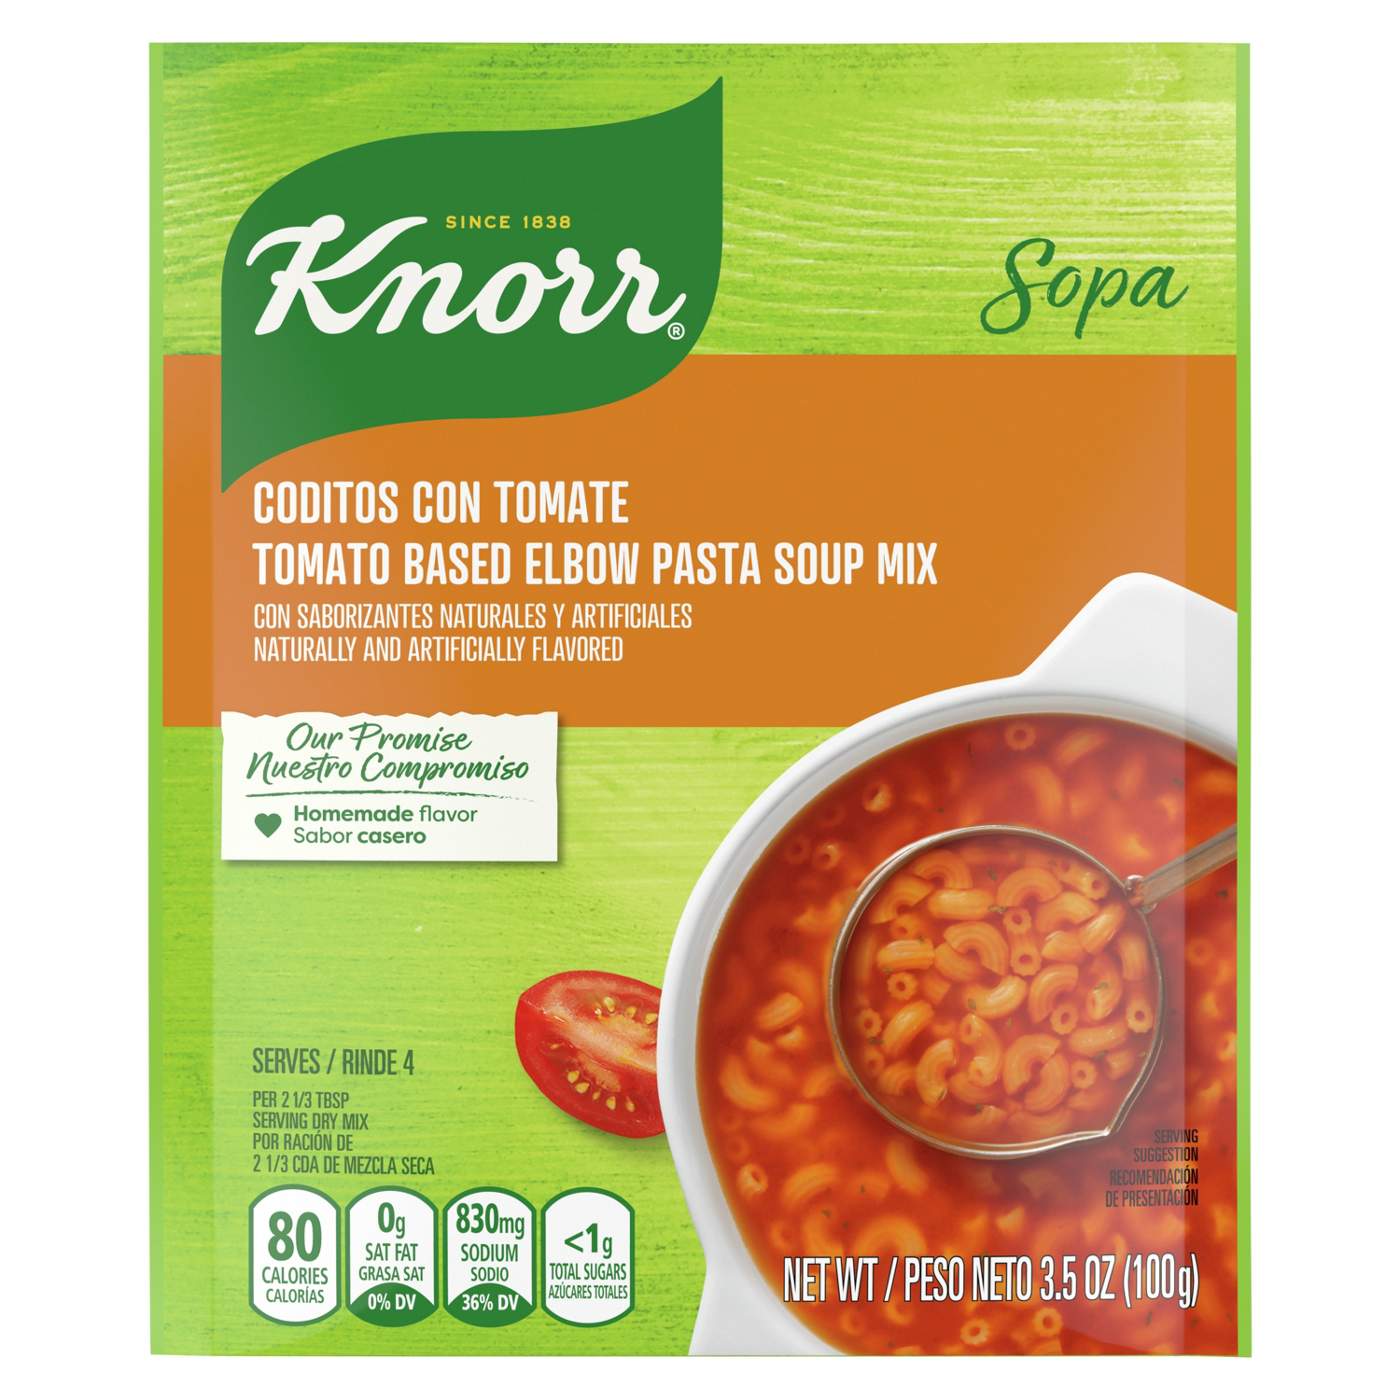 Knorr Sopa Elbow Pasta Tomato Soup Mix; image 1 of 7